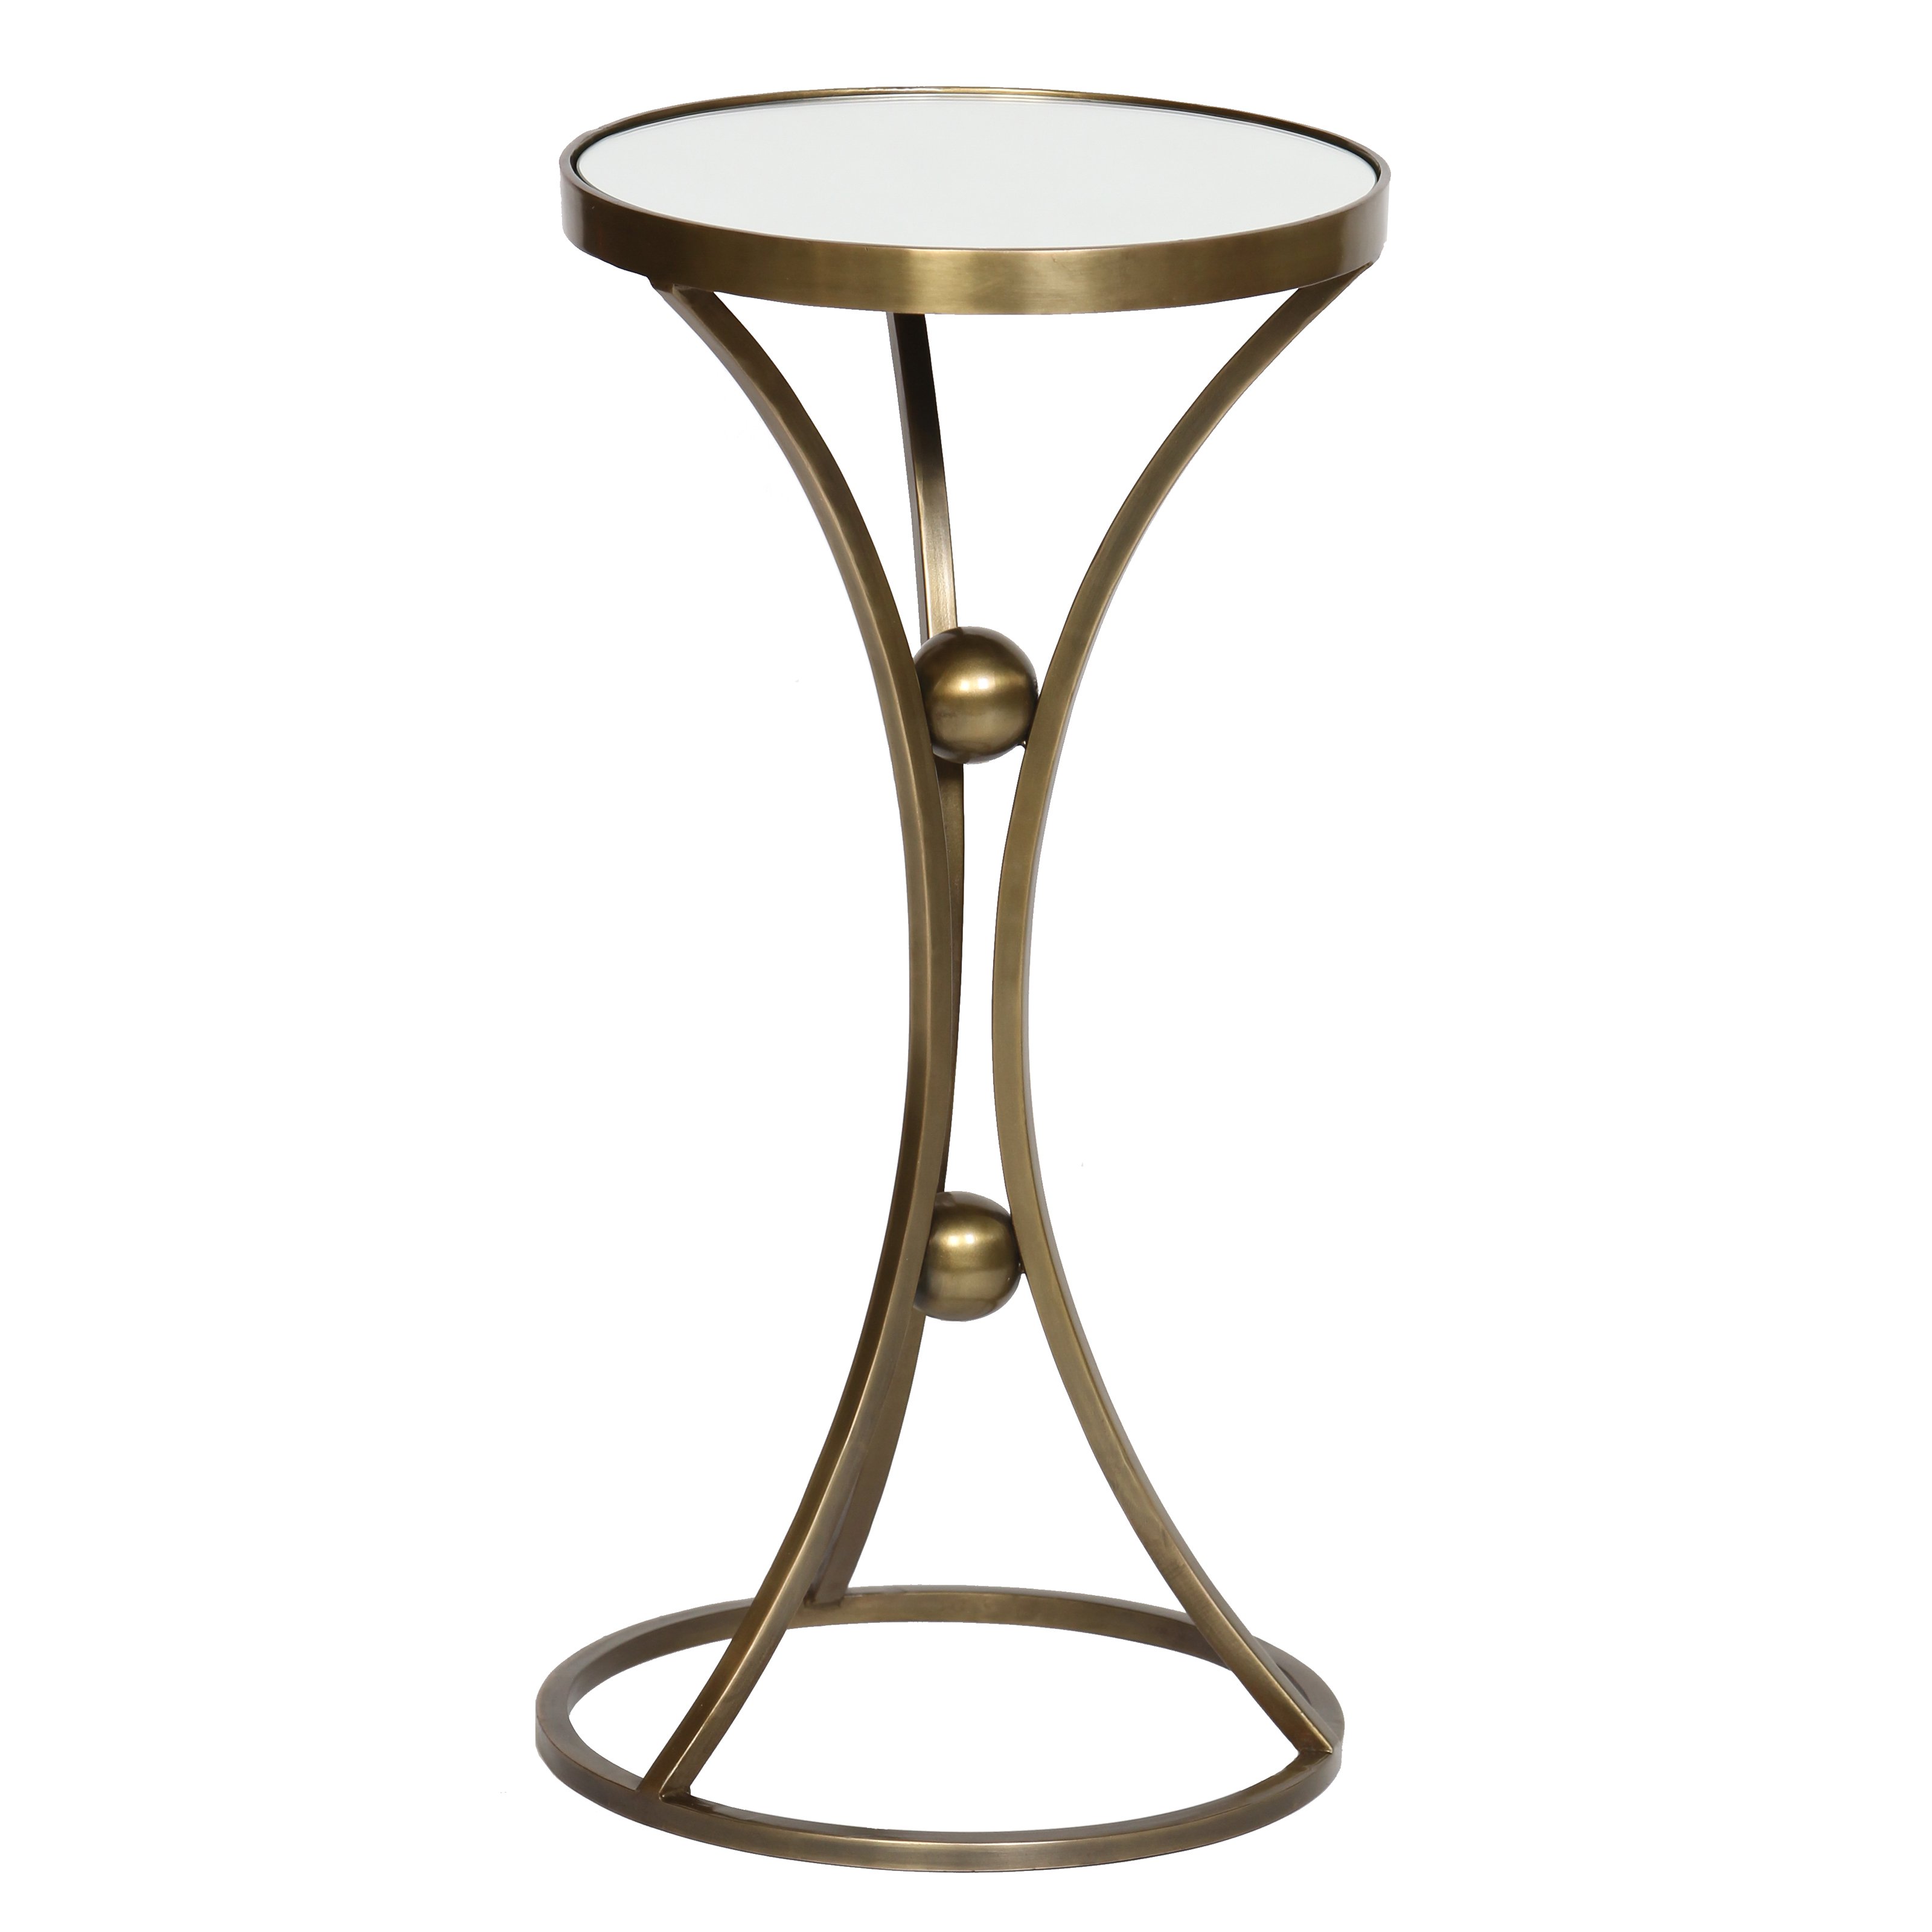 prima legged accent table antique brass mission end plans ashley furniture round coffee ikea bedroom wardrobes the pier nautical peva tablecloth standard sizes rustic sliding door